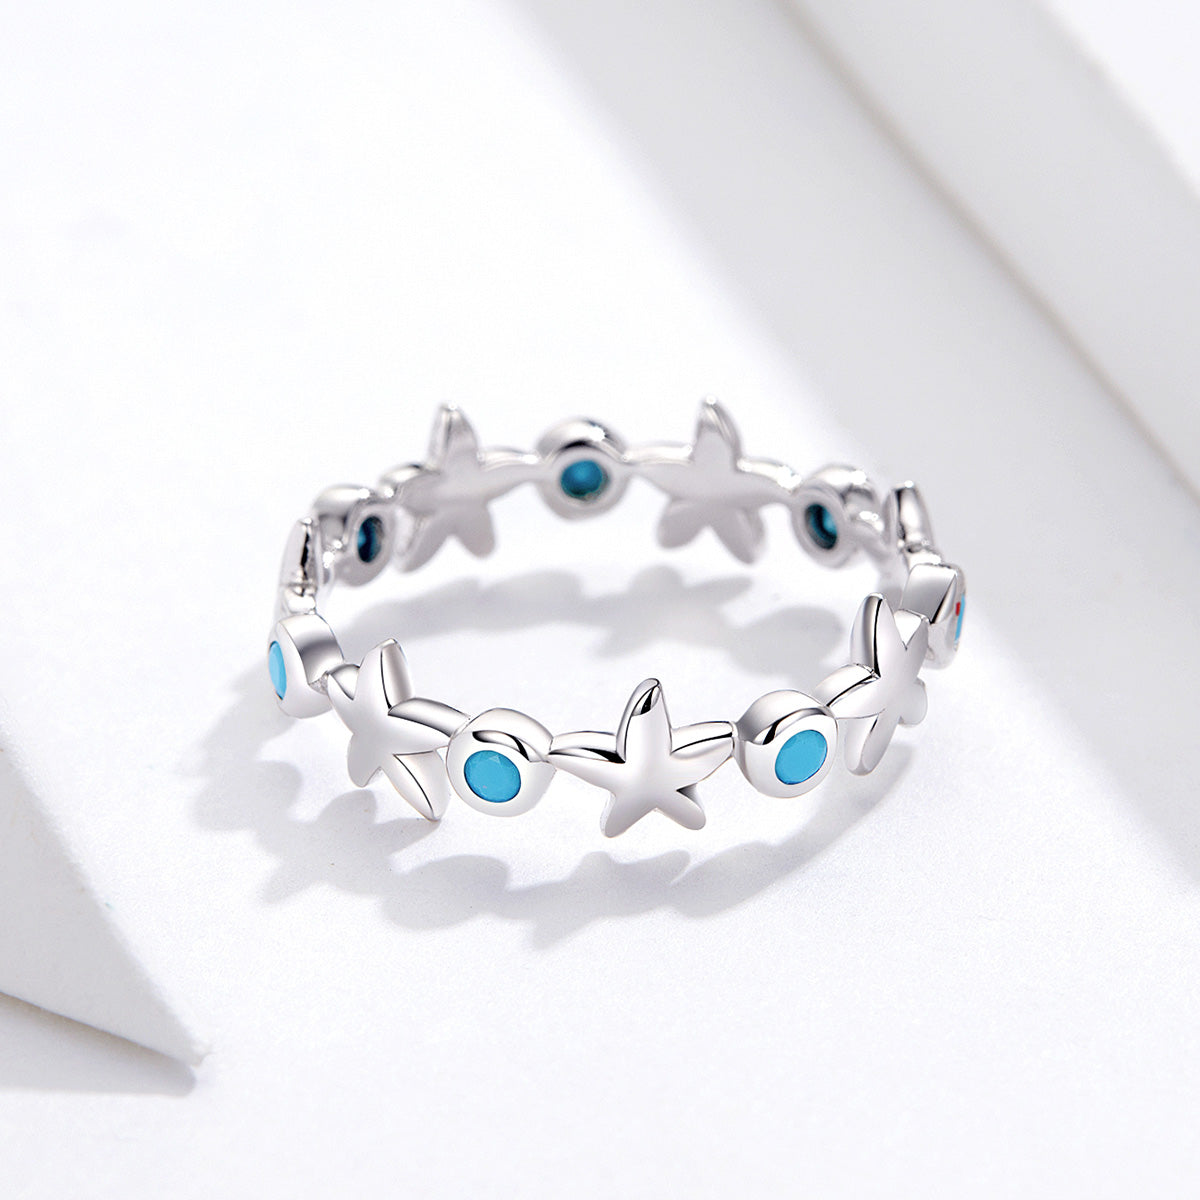 Size 6 - Star Ring with Turquoise inset - Ocean Blue Starfish Stackable Ring - Sterling Silver 925 - NEW622